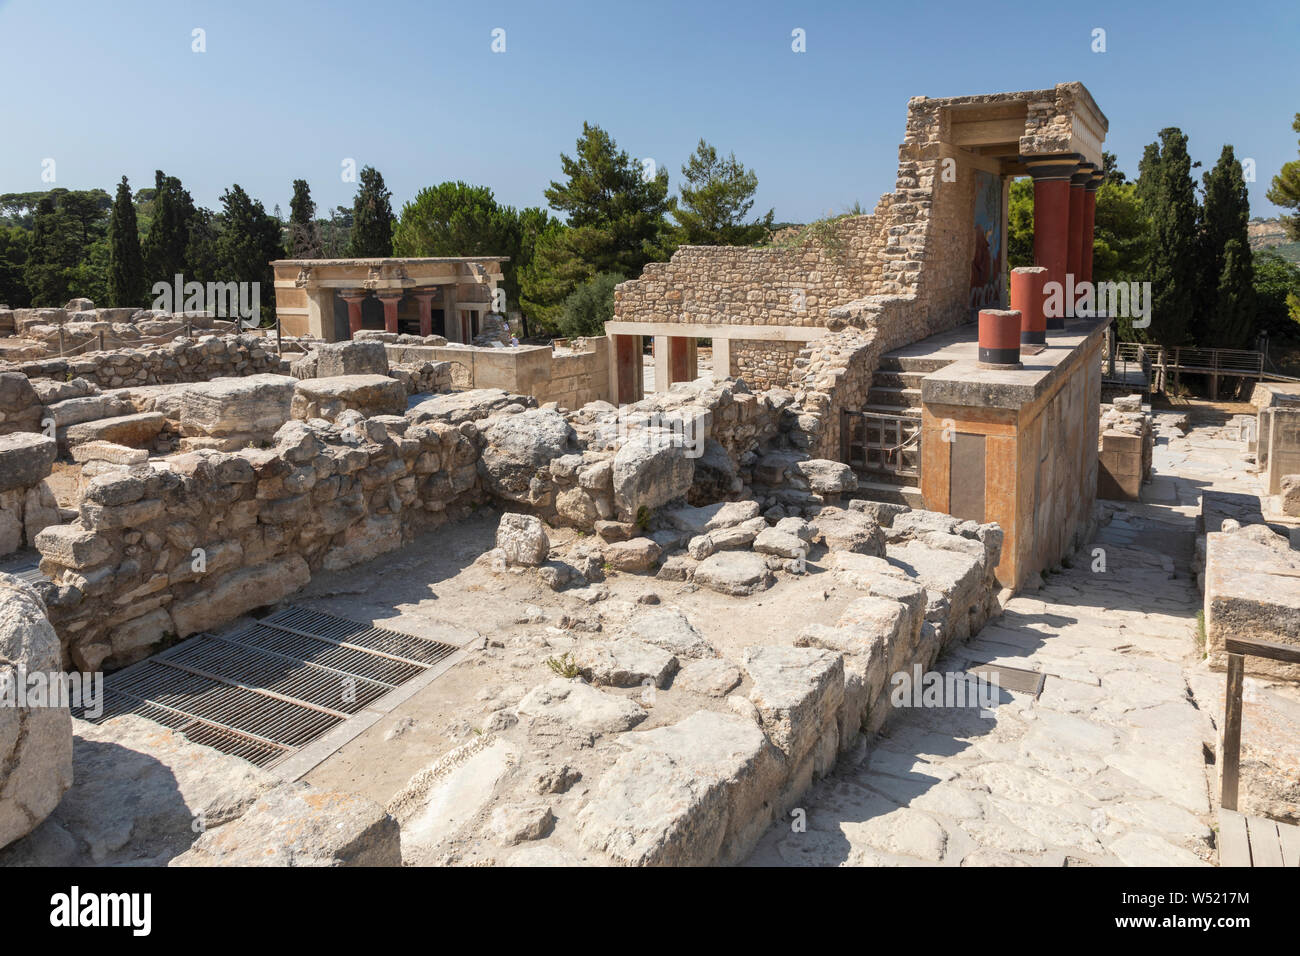 The Palace of Knossos North Entrance, Archaeological Site, Crete, Greece Stock Photo